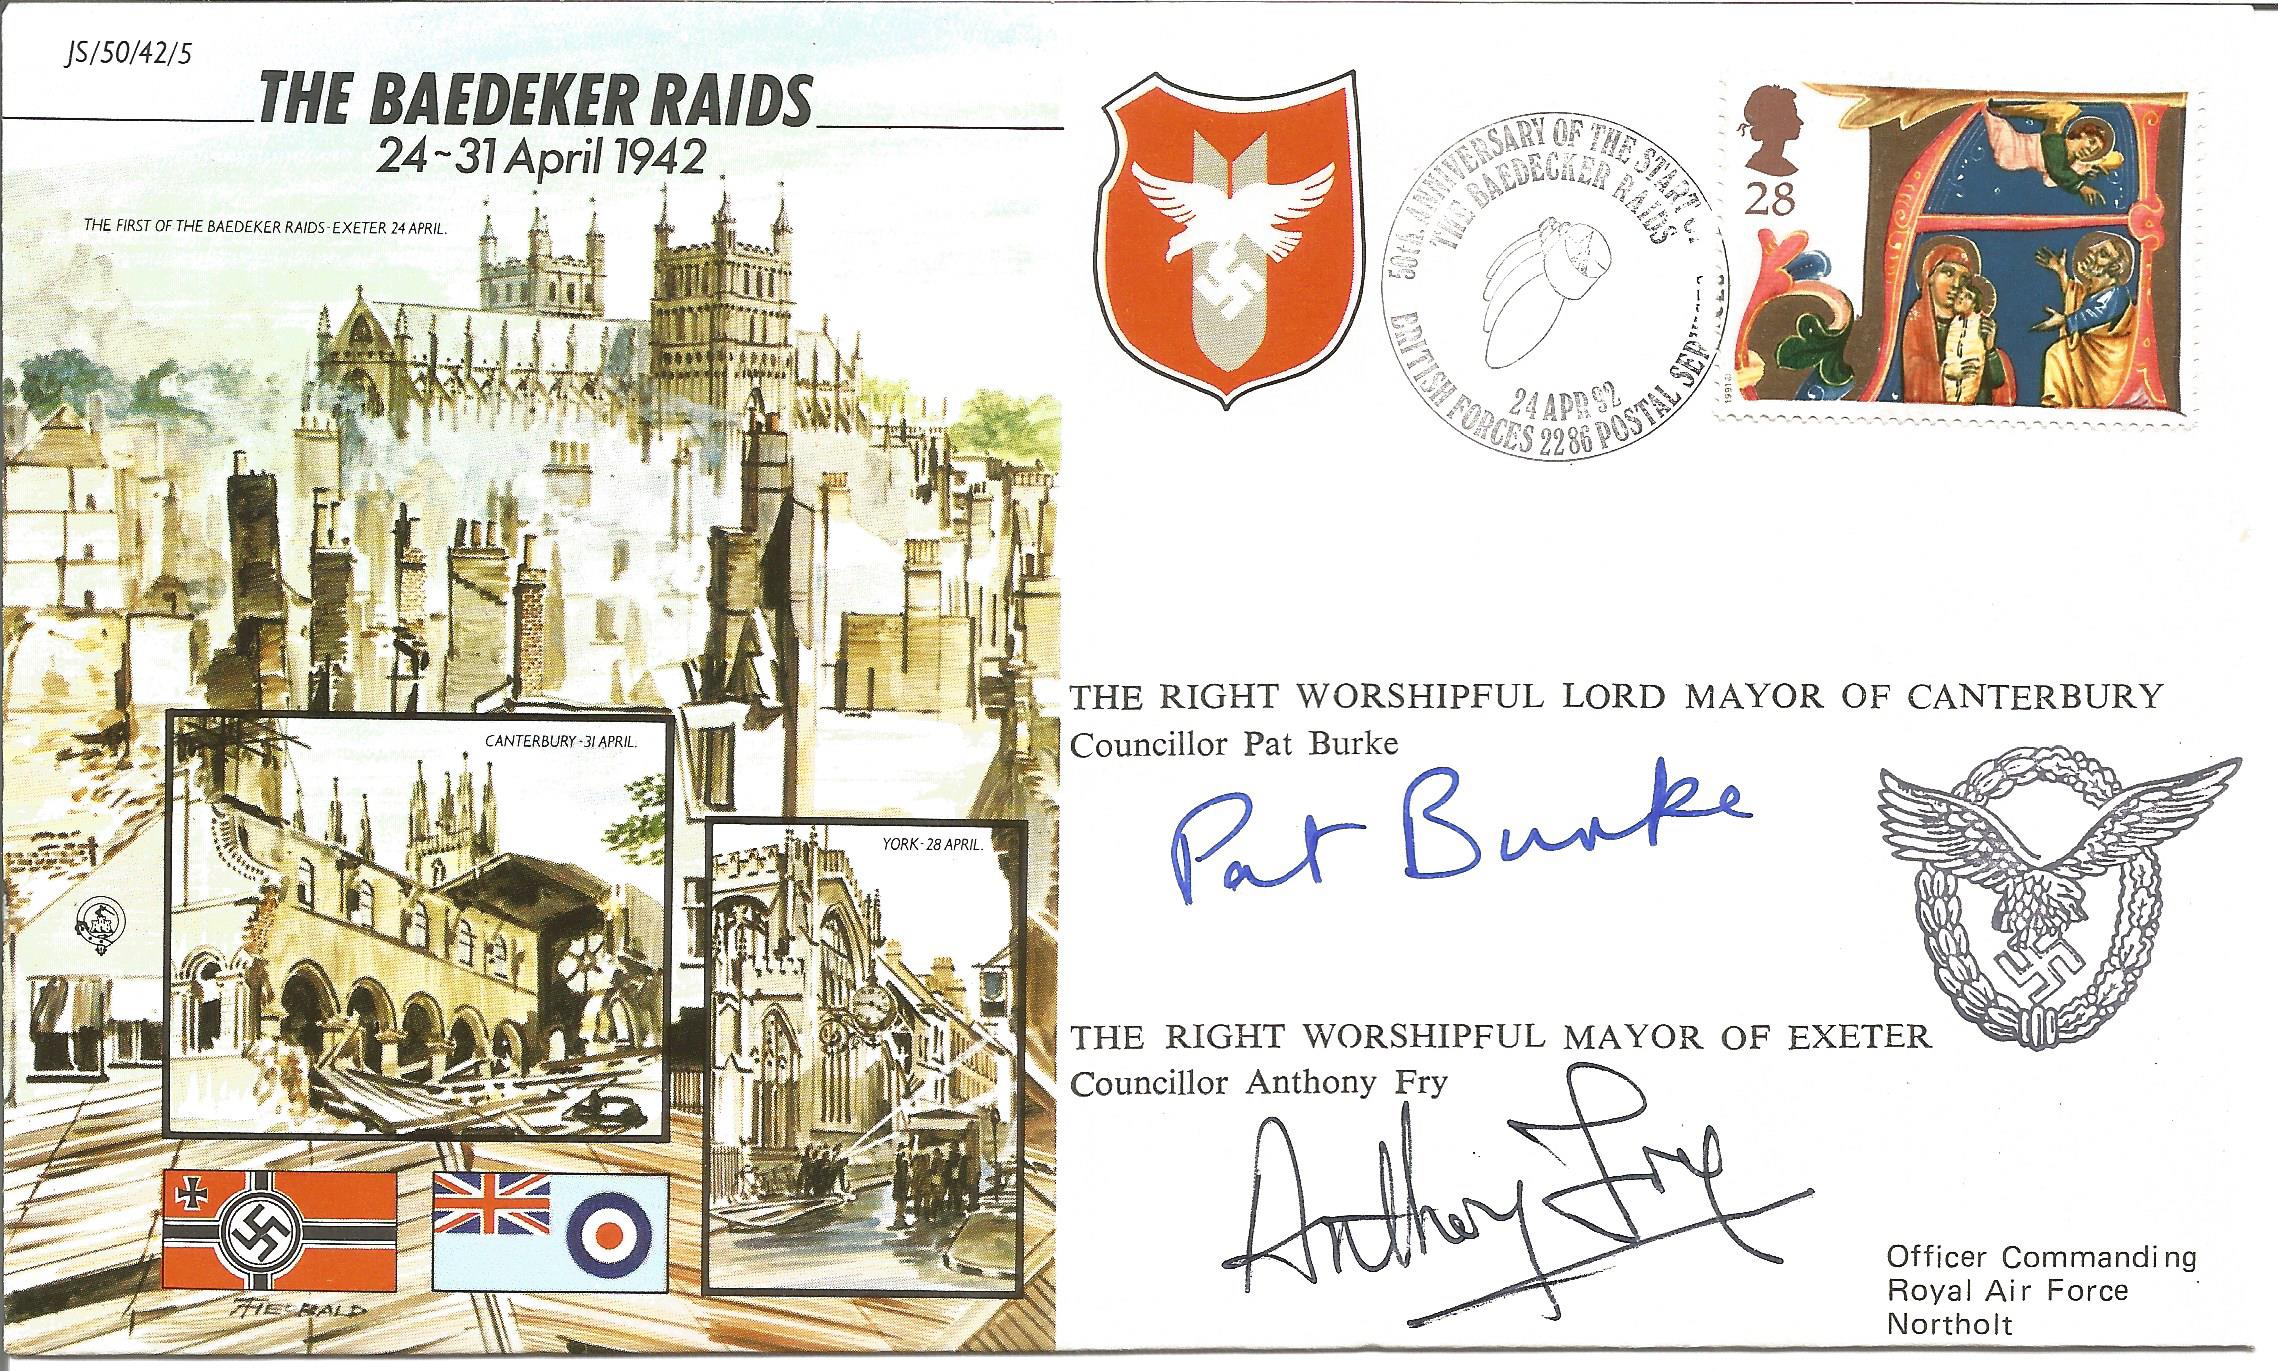 The Baedeker Raids official double signed Royal Air Force cover JS/50/42/5. Signed by The Right